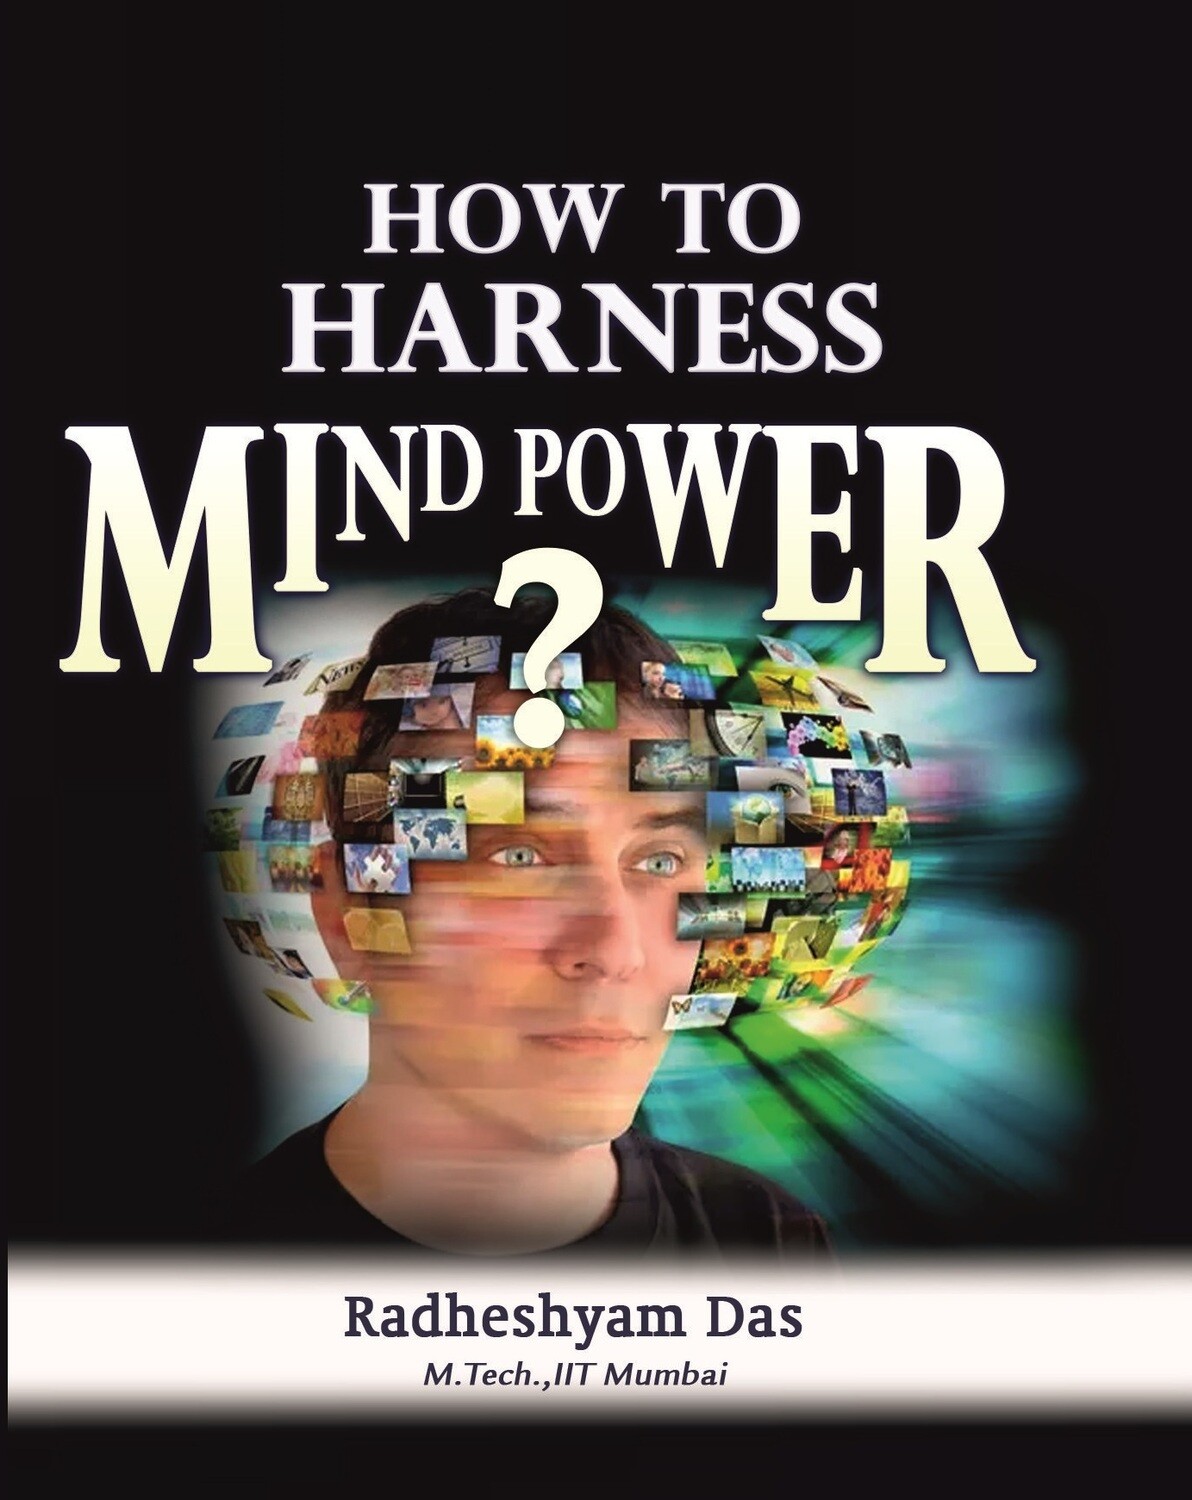 How to Harness Mind Power